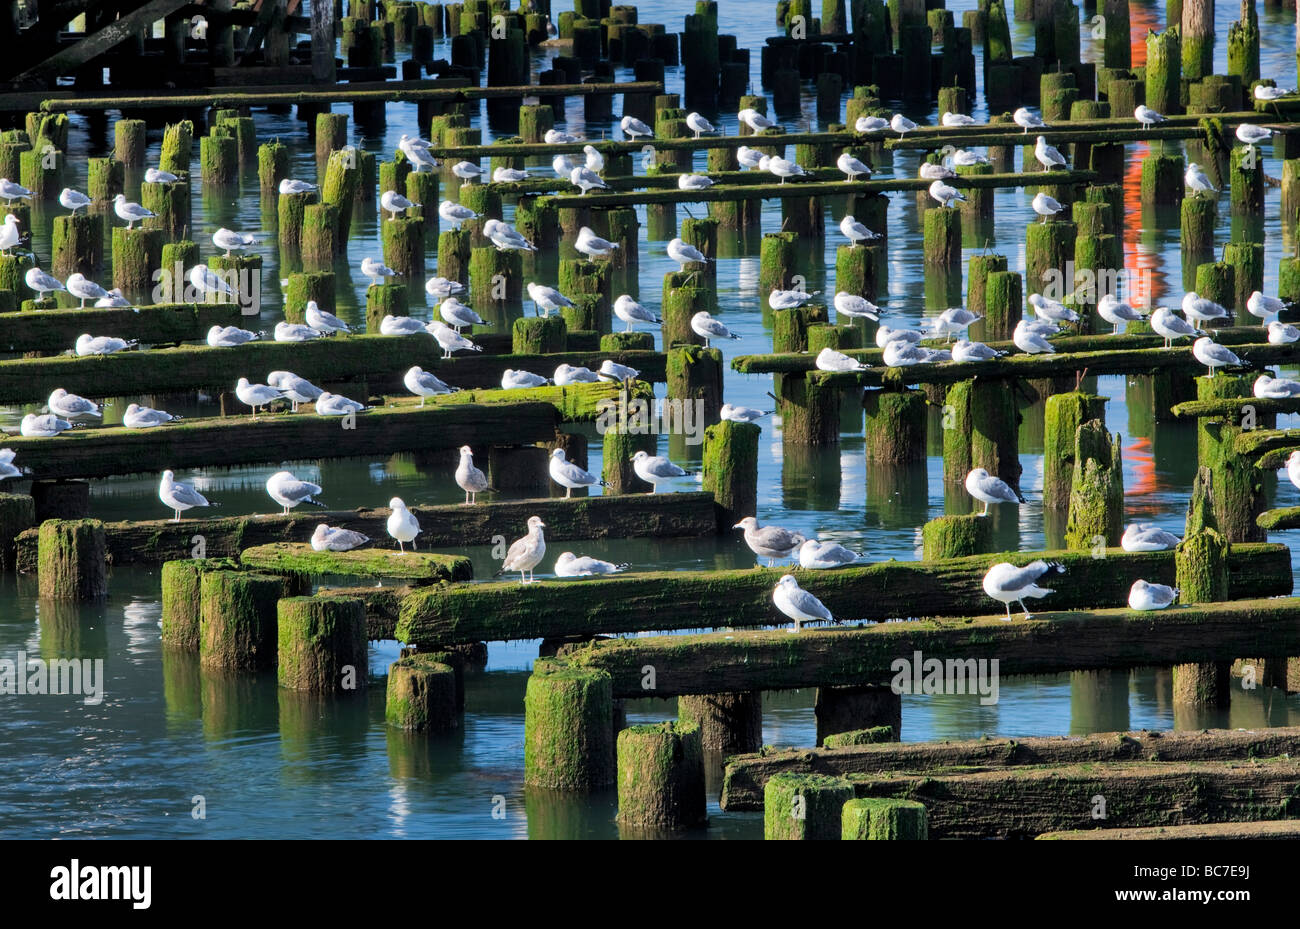 Seaguls resting on old building structure Astoria Oregon Stock Photo